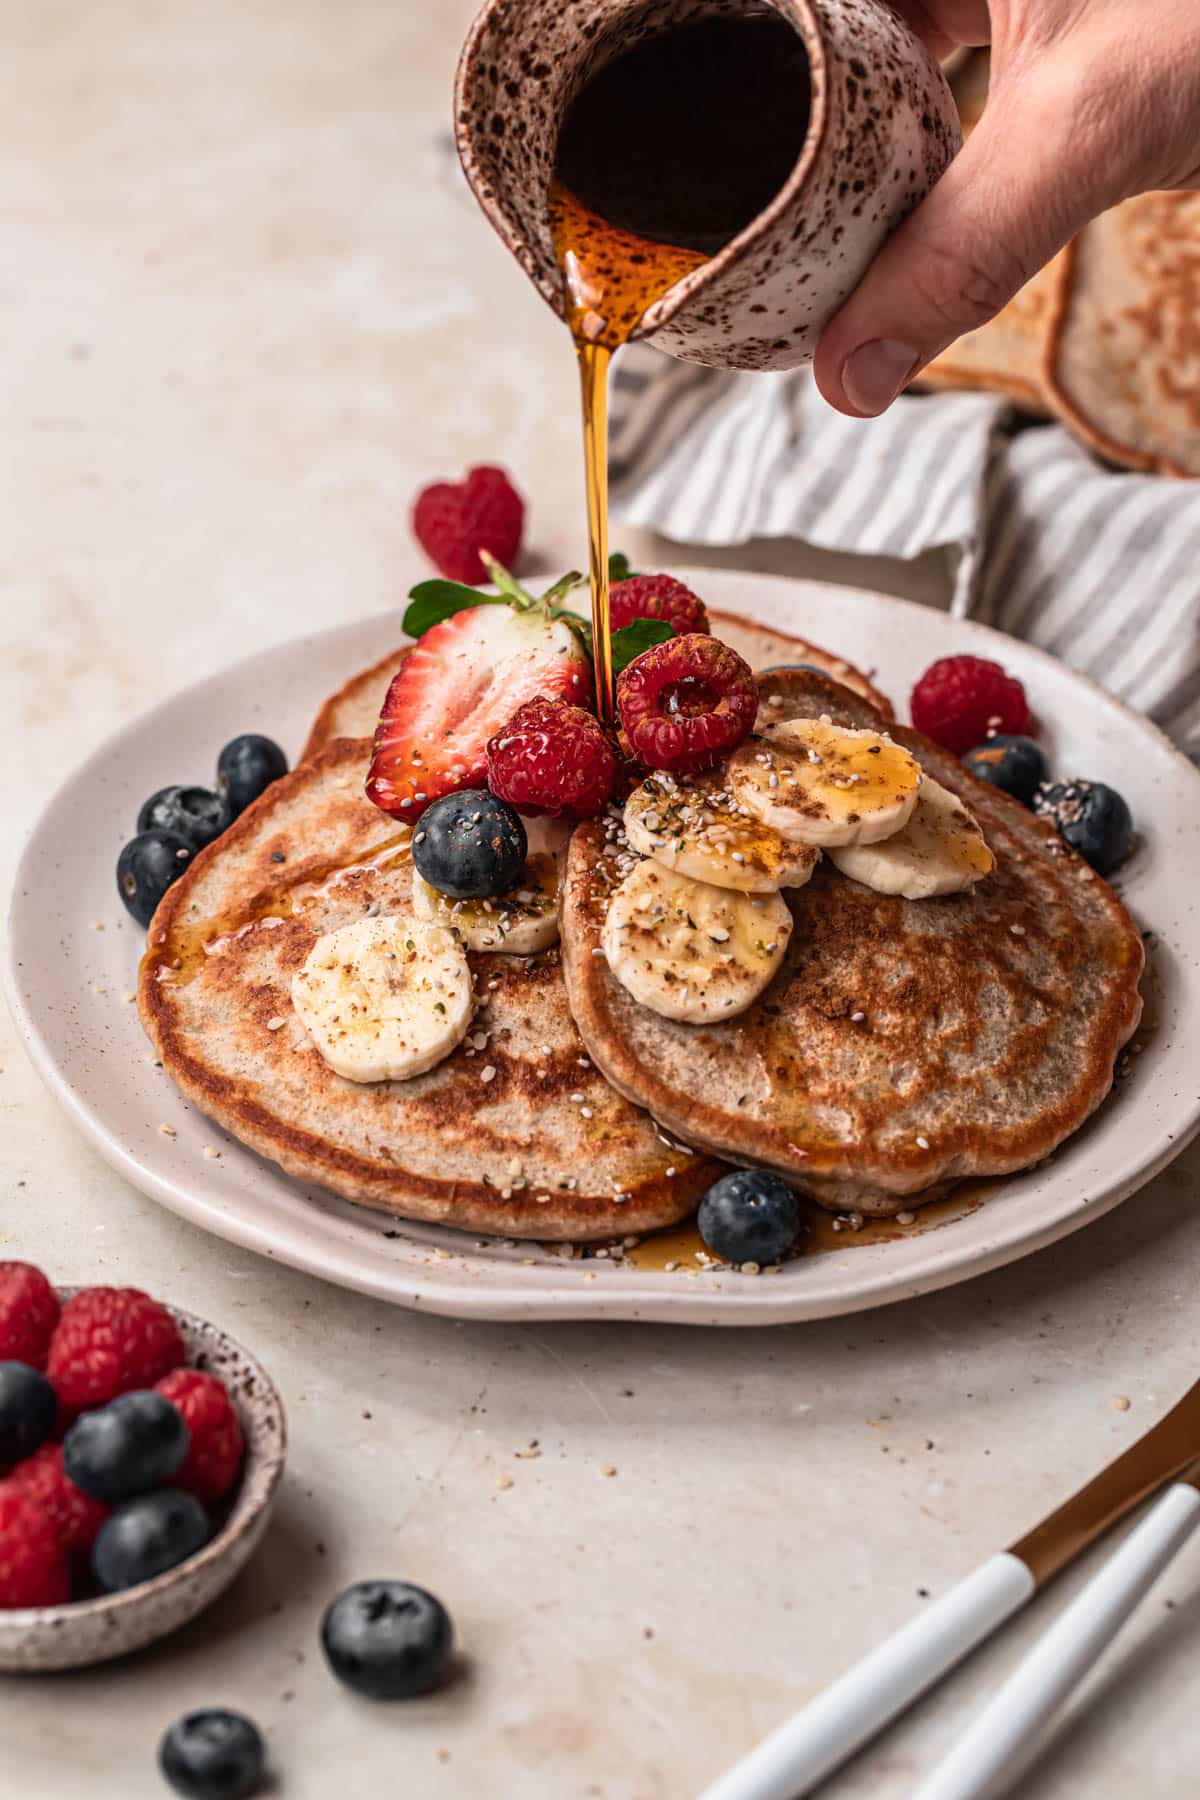 Maple syrup being poured onto a plate of banana buckwheat pancakes.